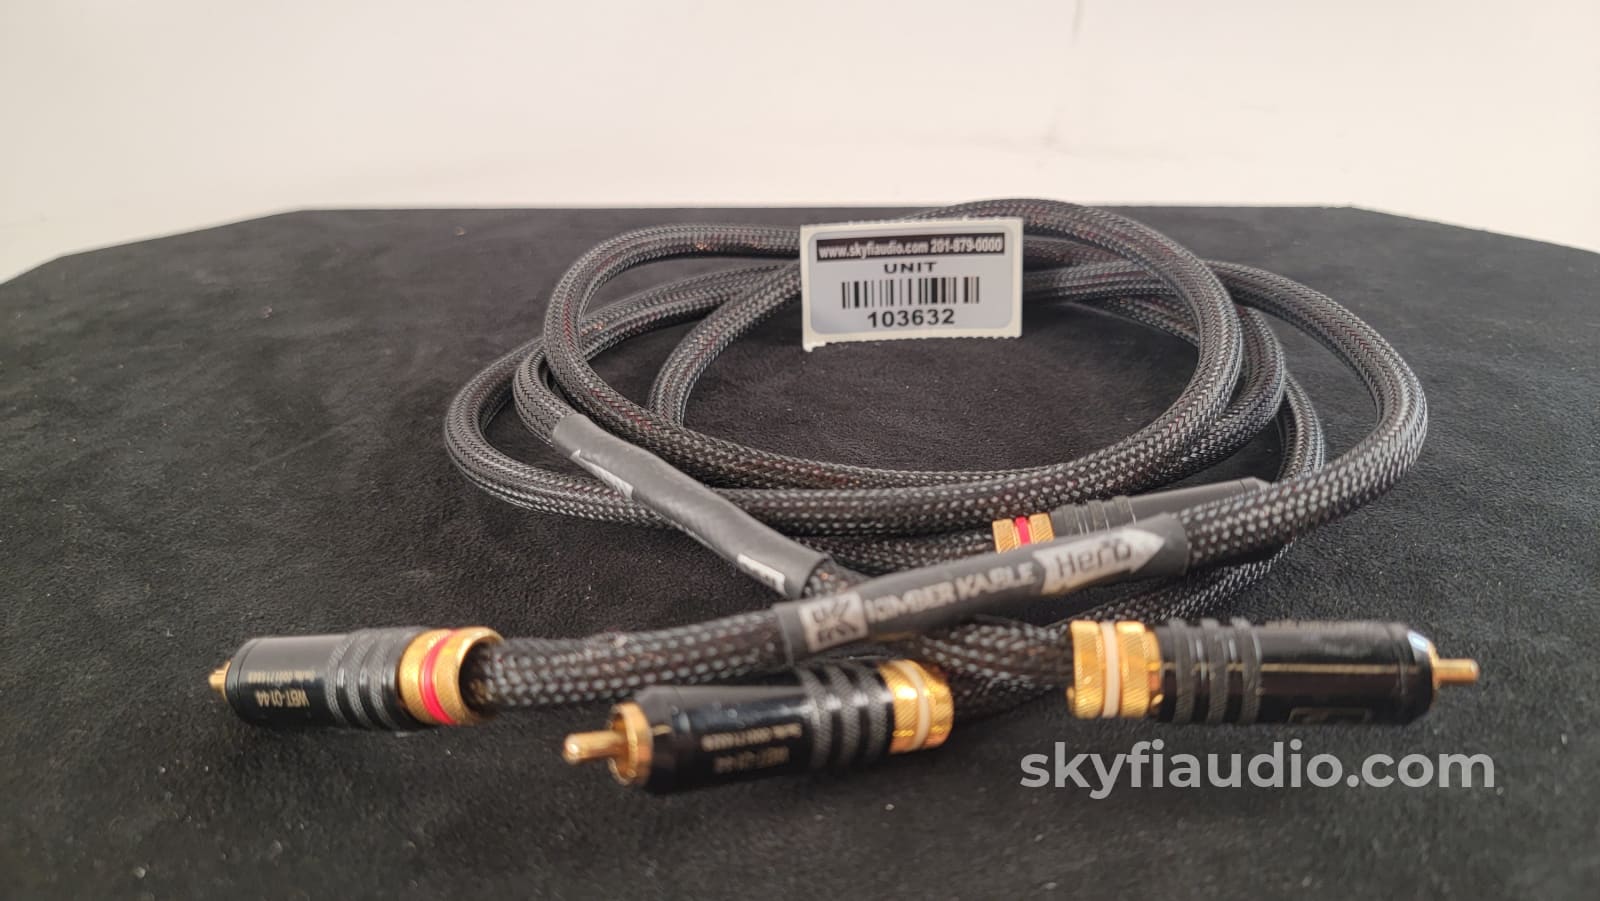 Kimber Kable Hero RCA Interconnects (Pair) with German-Made WBT Connectors  - 1 Meter